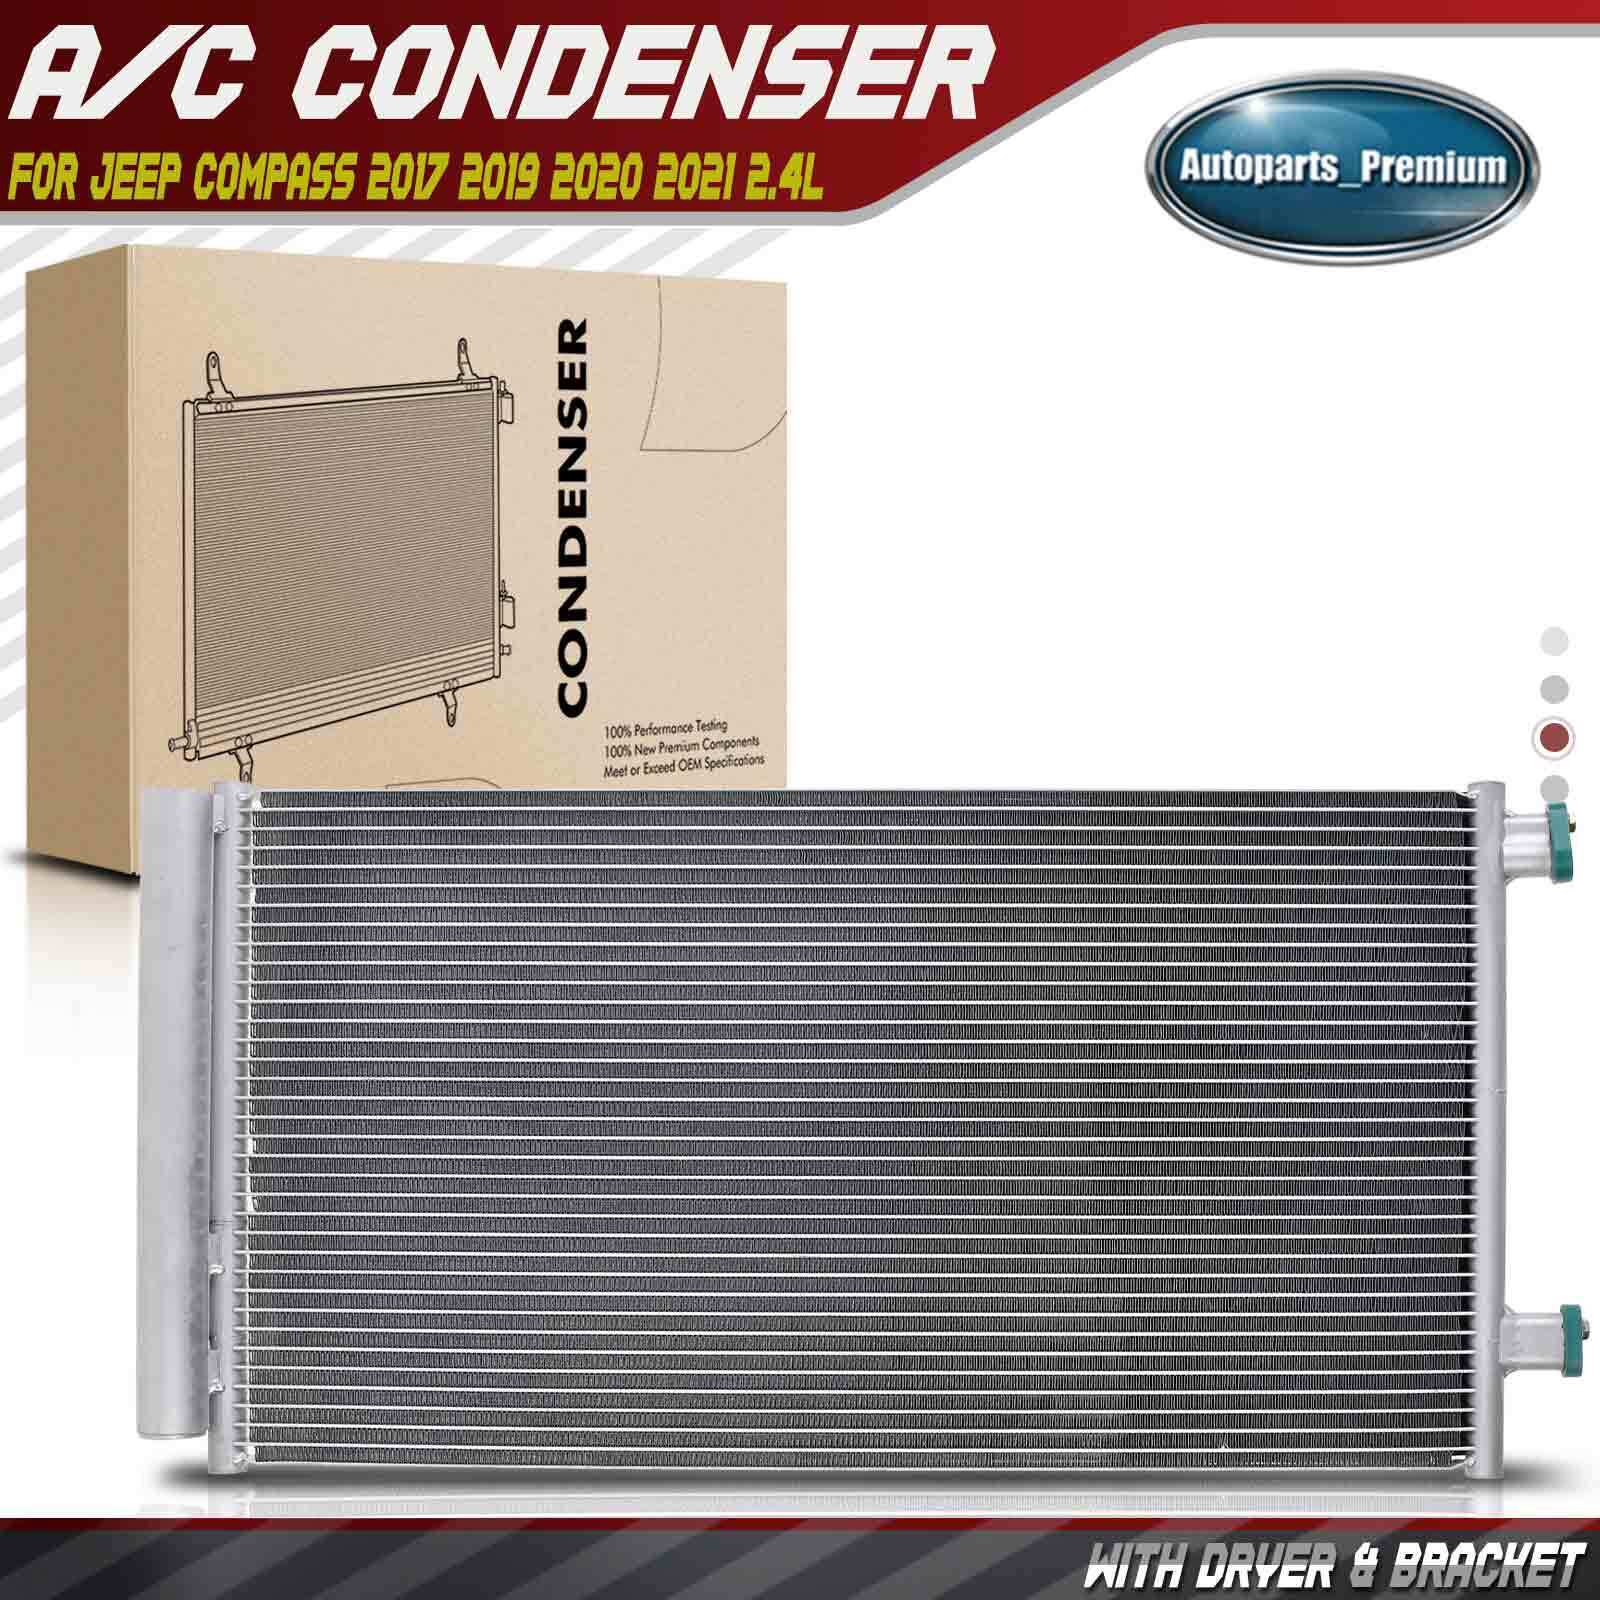 AC Condenser A/C Air Conditioning for Jeep Compass 2018 2019 2020 2021 L4 2.4L